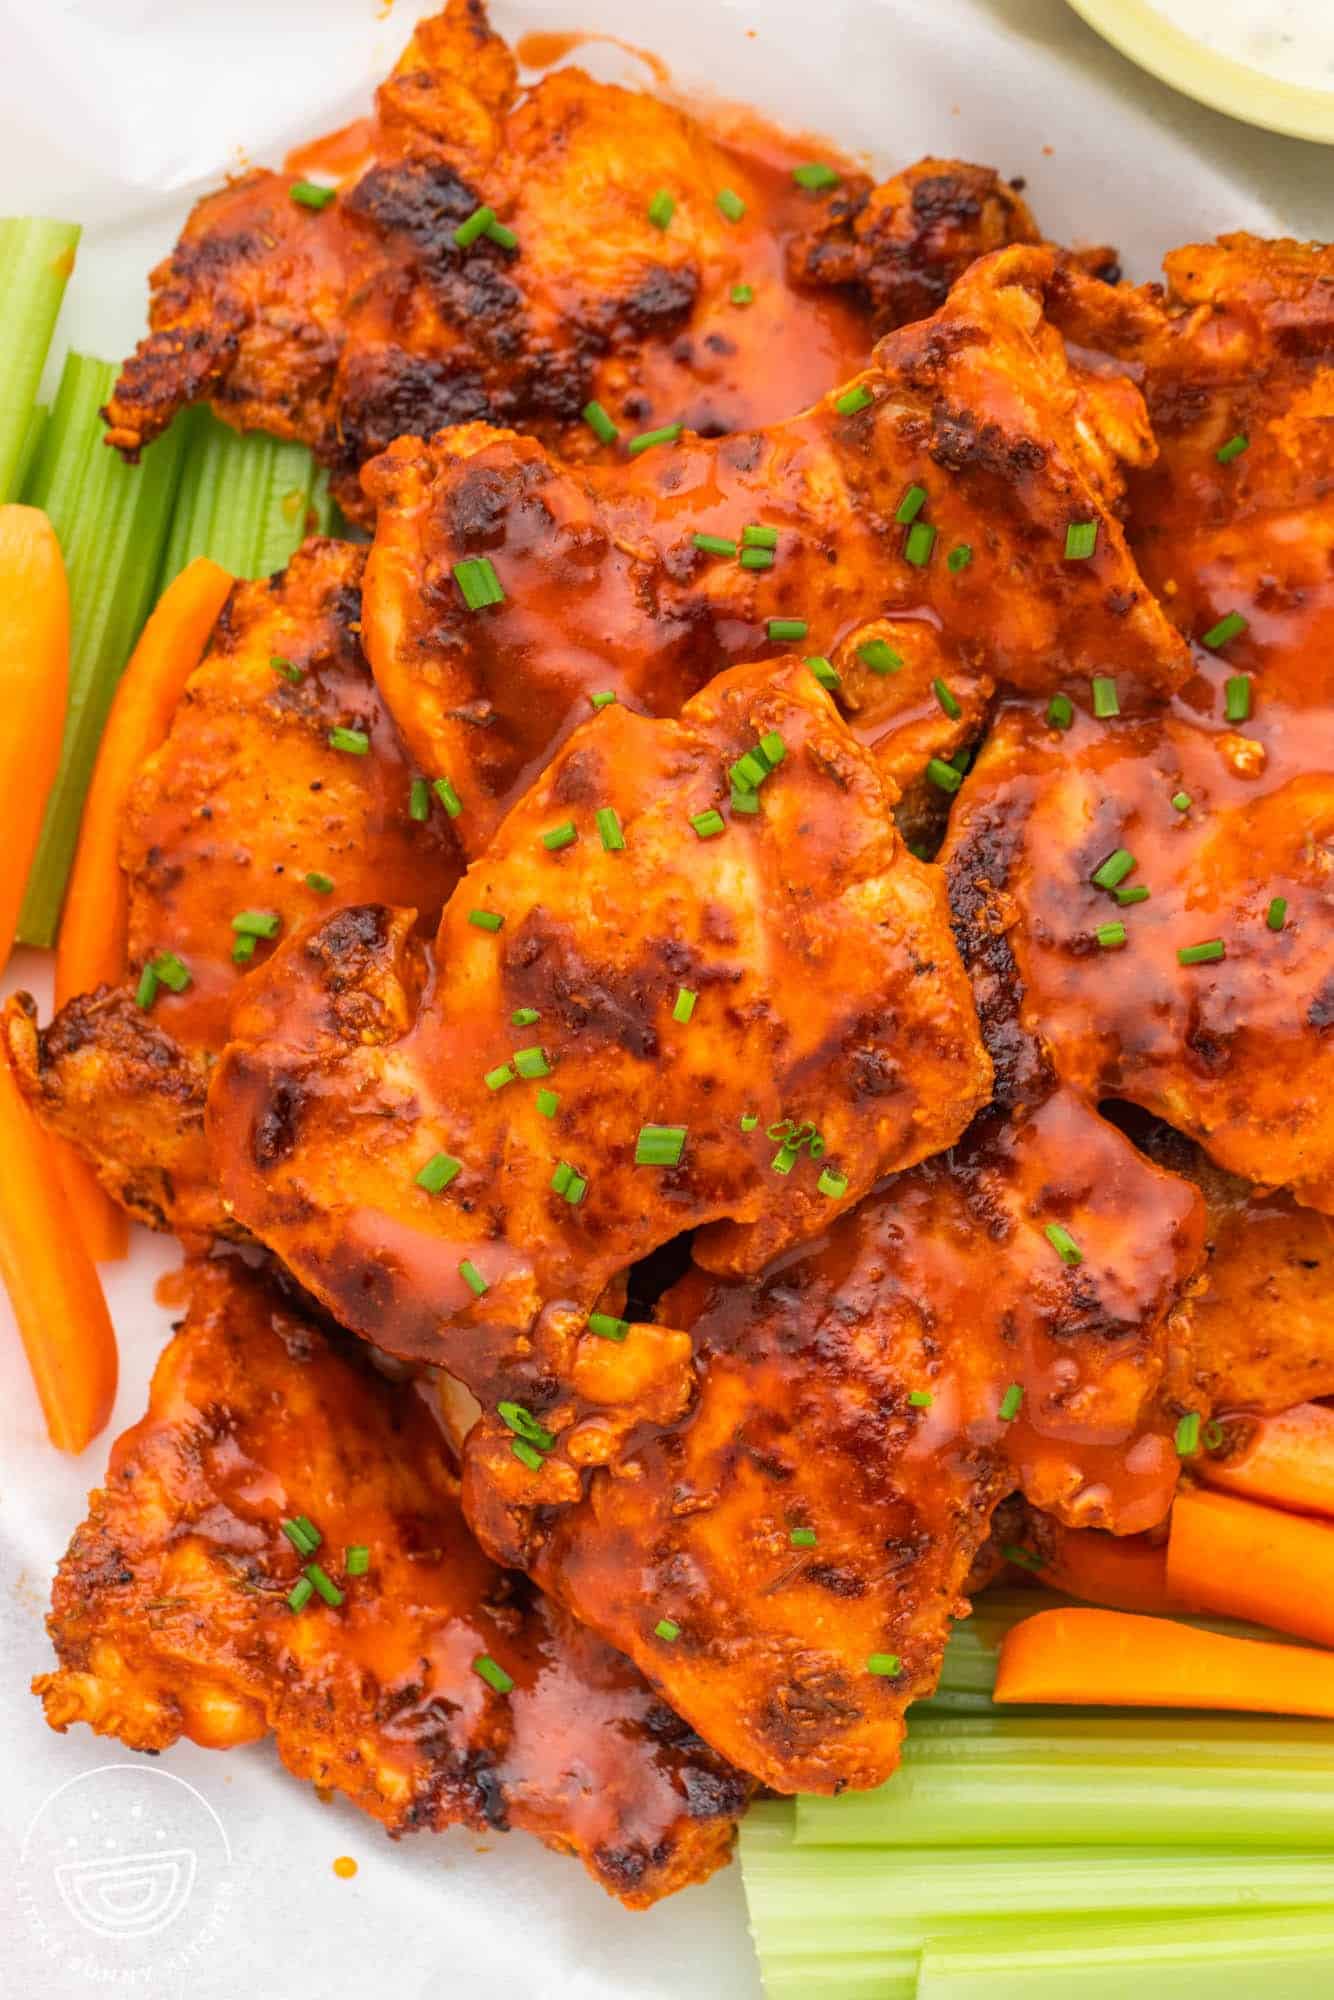 a pile of buffalo chicken thighs on a platter with celery sticks.